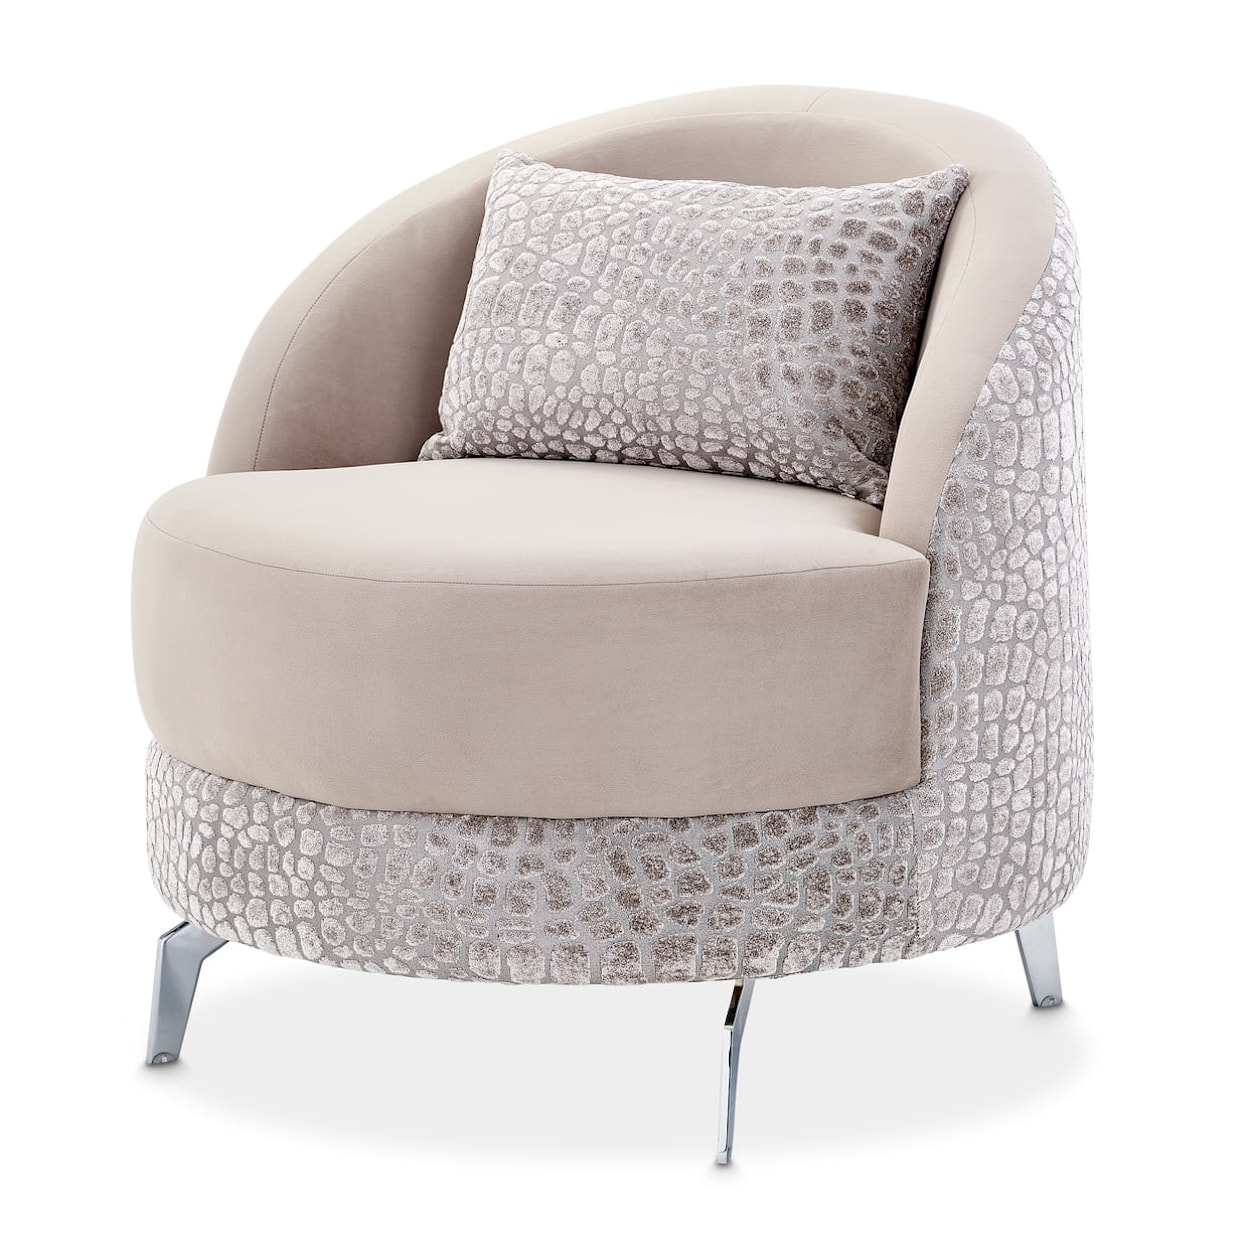 Michael Amini Dion Upholstered Accent Chair